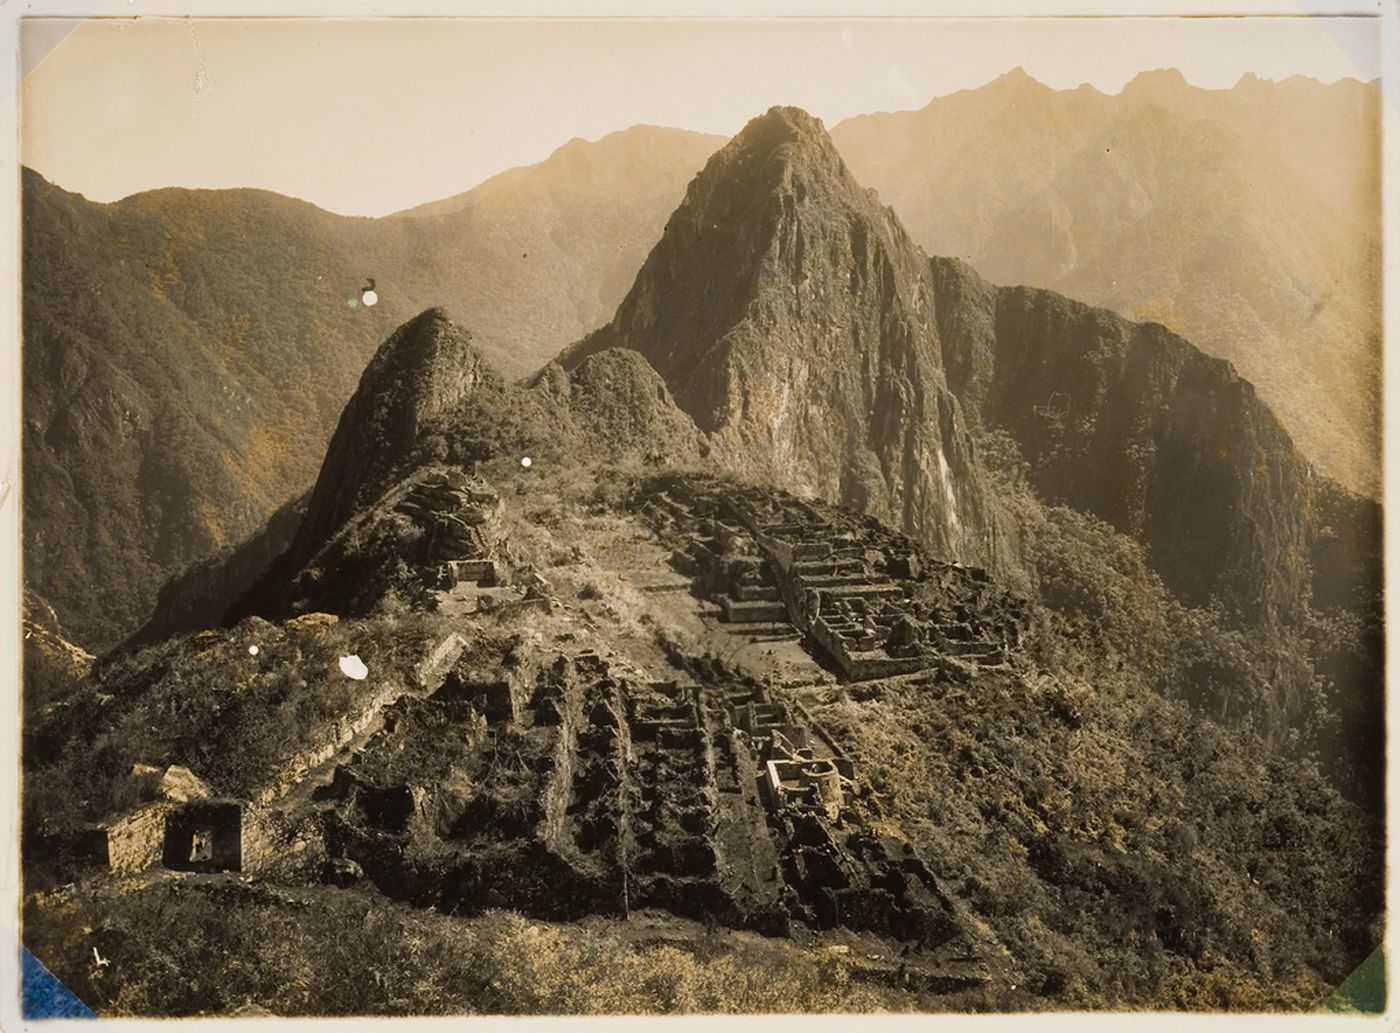 Aerial view of Machu Picchu with mountains in the background, Peru